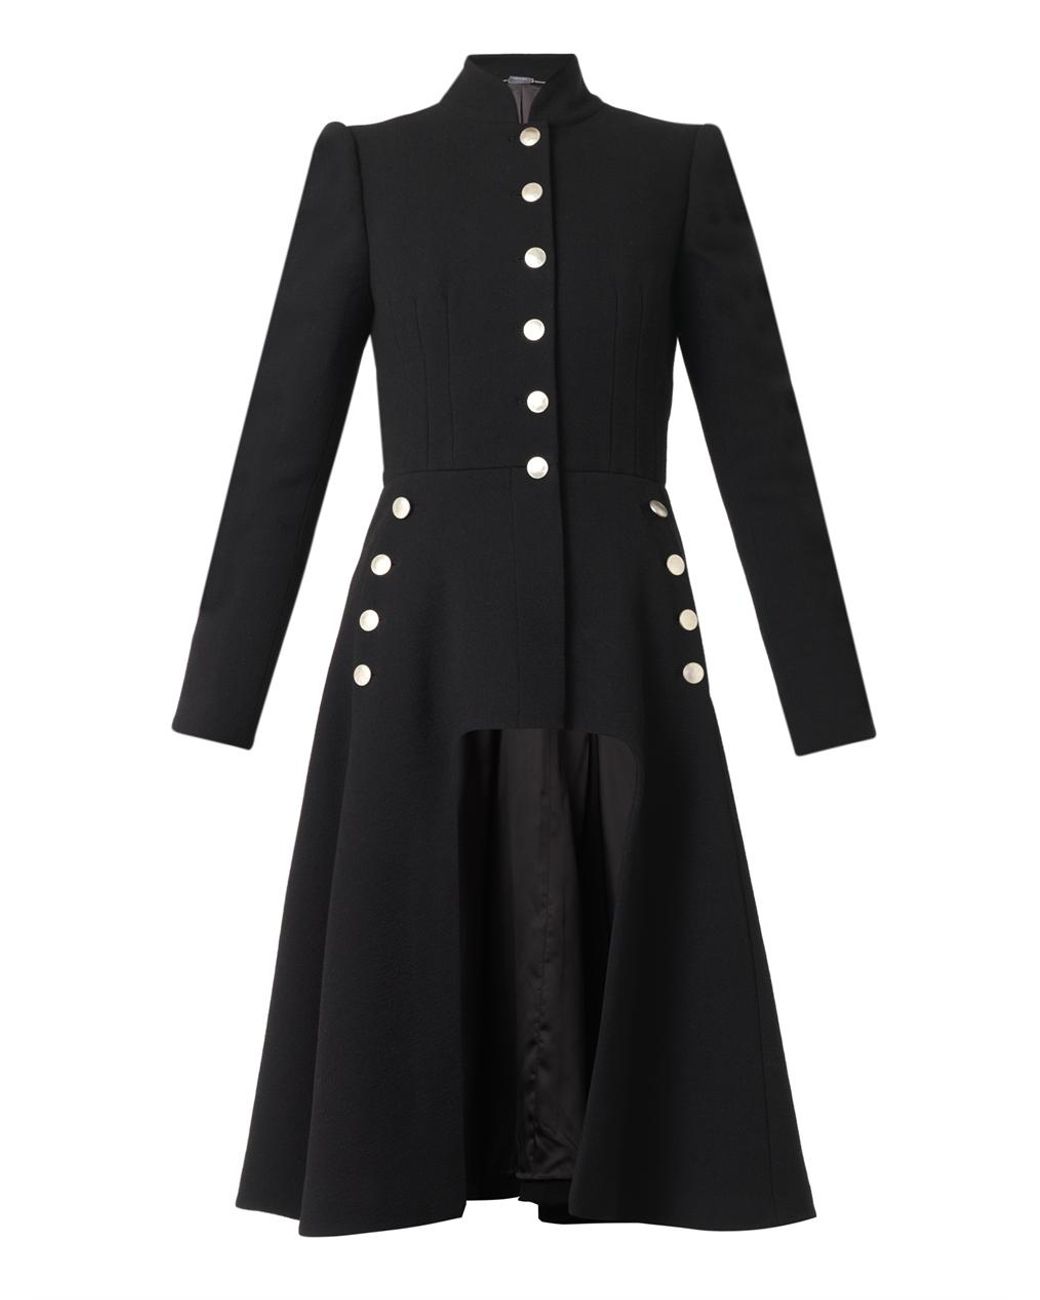 Alexander McQueen Cut-out Front Military Coat in Black | Lyst